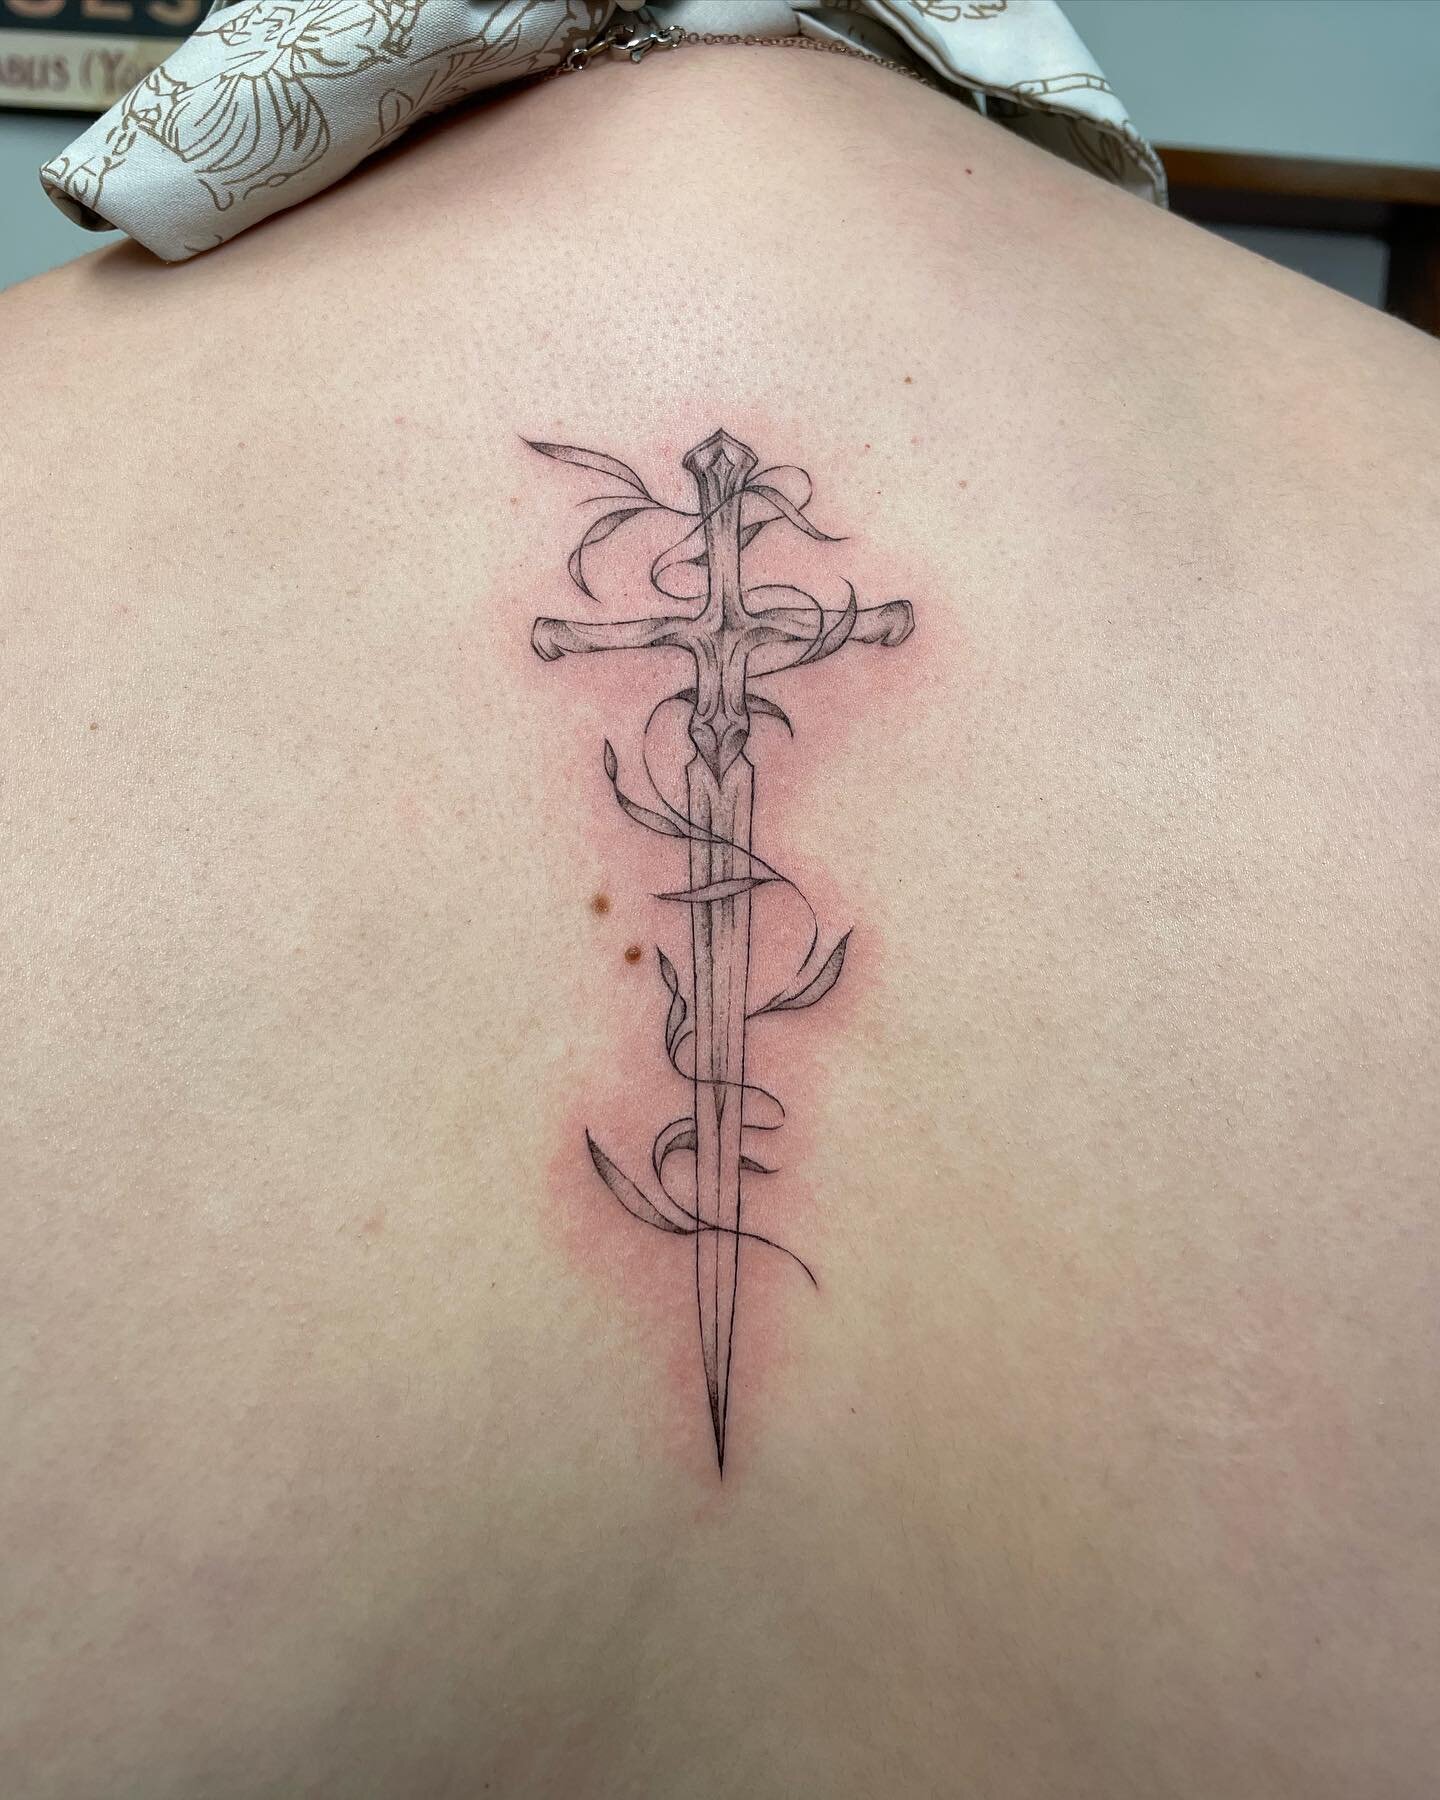 🗡️🌿 super excited about this sword for birchie 💖 obsessed with the placement! always the best! thank you forever! ✨🌀 #fineline #finelinetattoo #delicatetattoo #daintytattoo